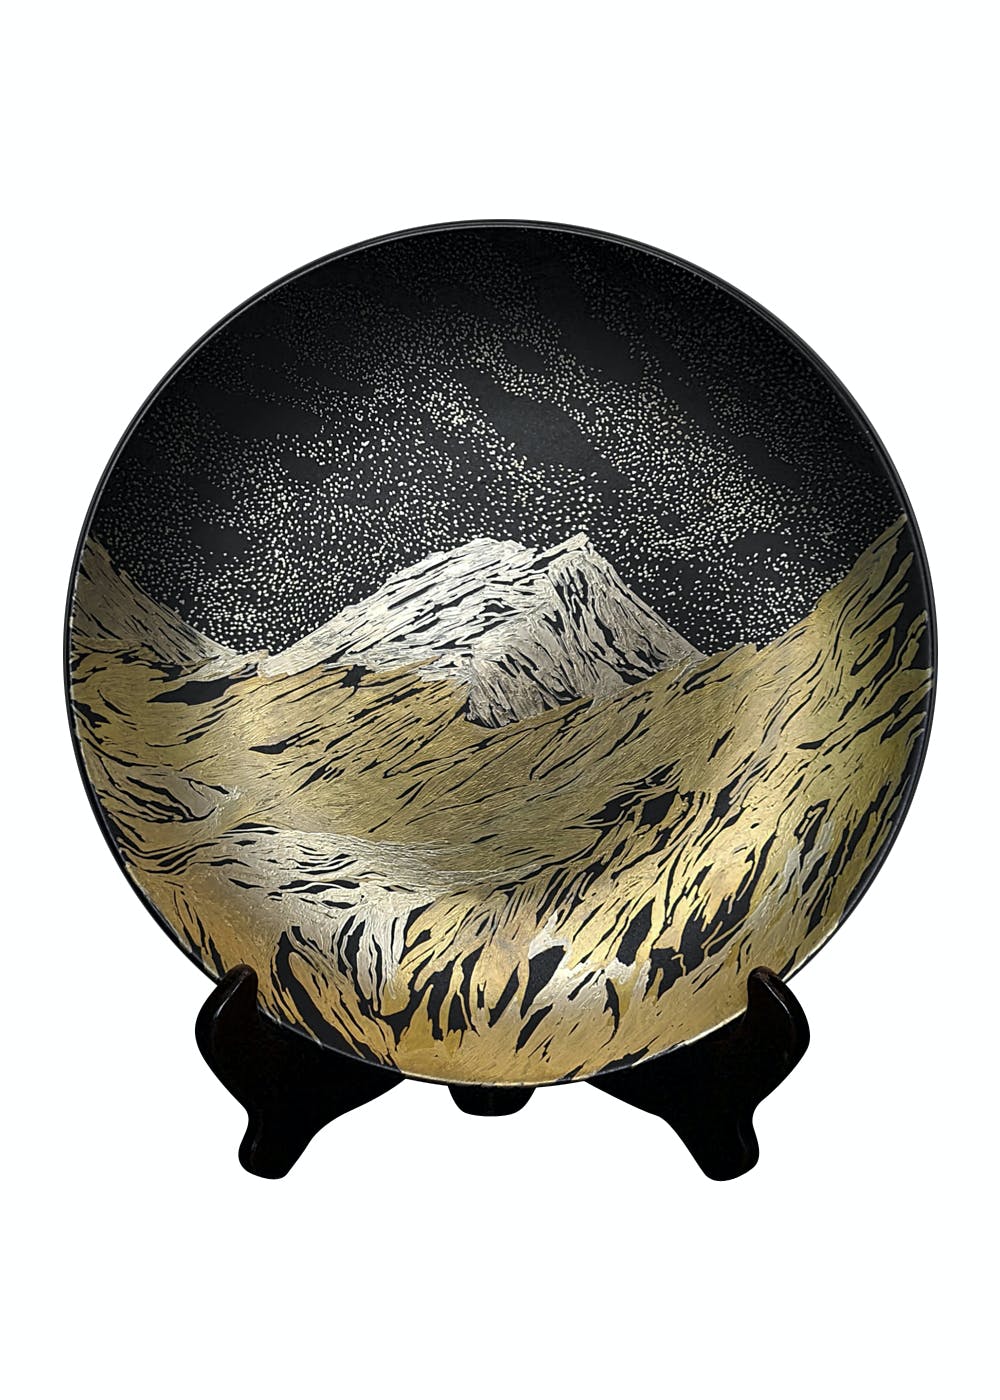 The Himalayan Odyssey Collectible Black Plate